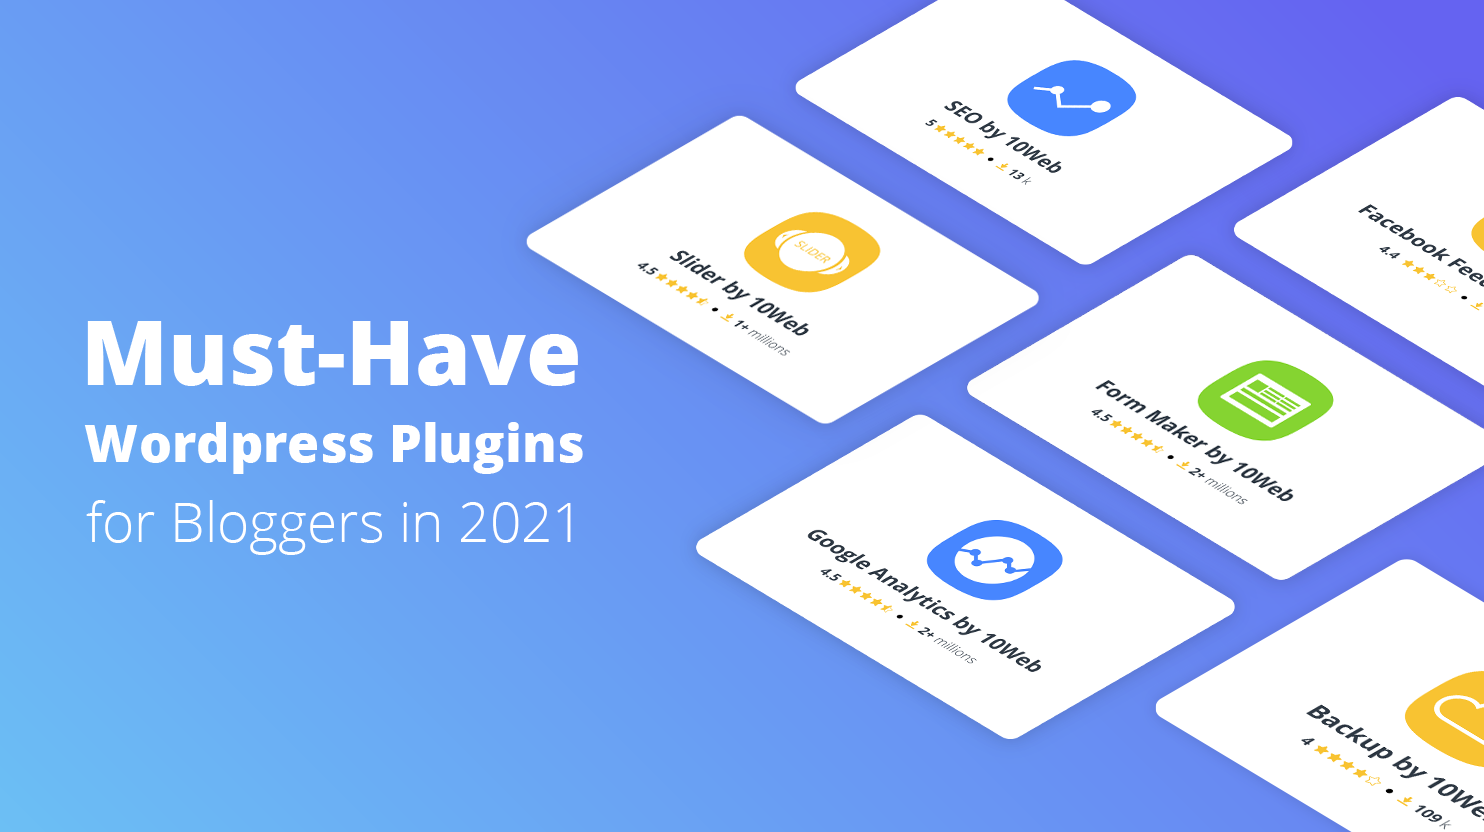 Must-Have WordPress Plugins for Bloggers in 2021